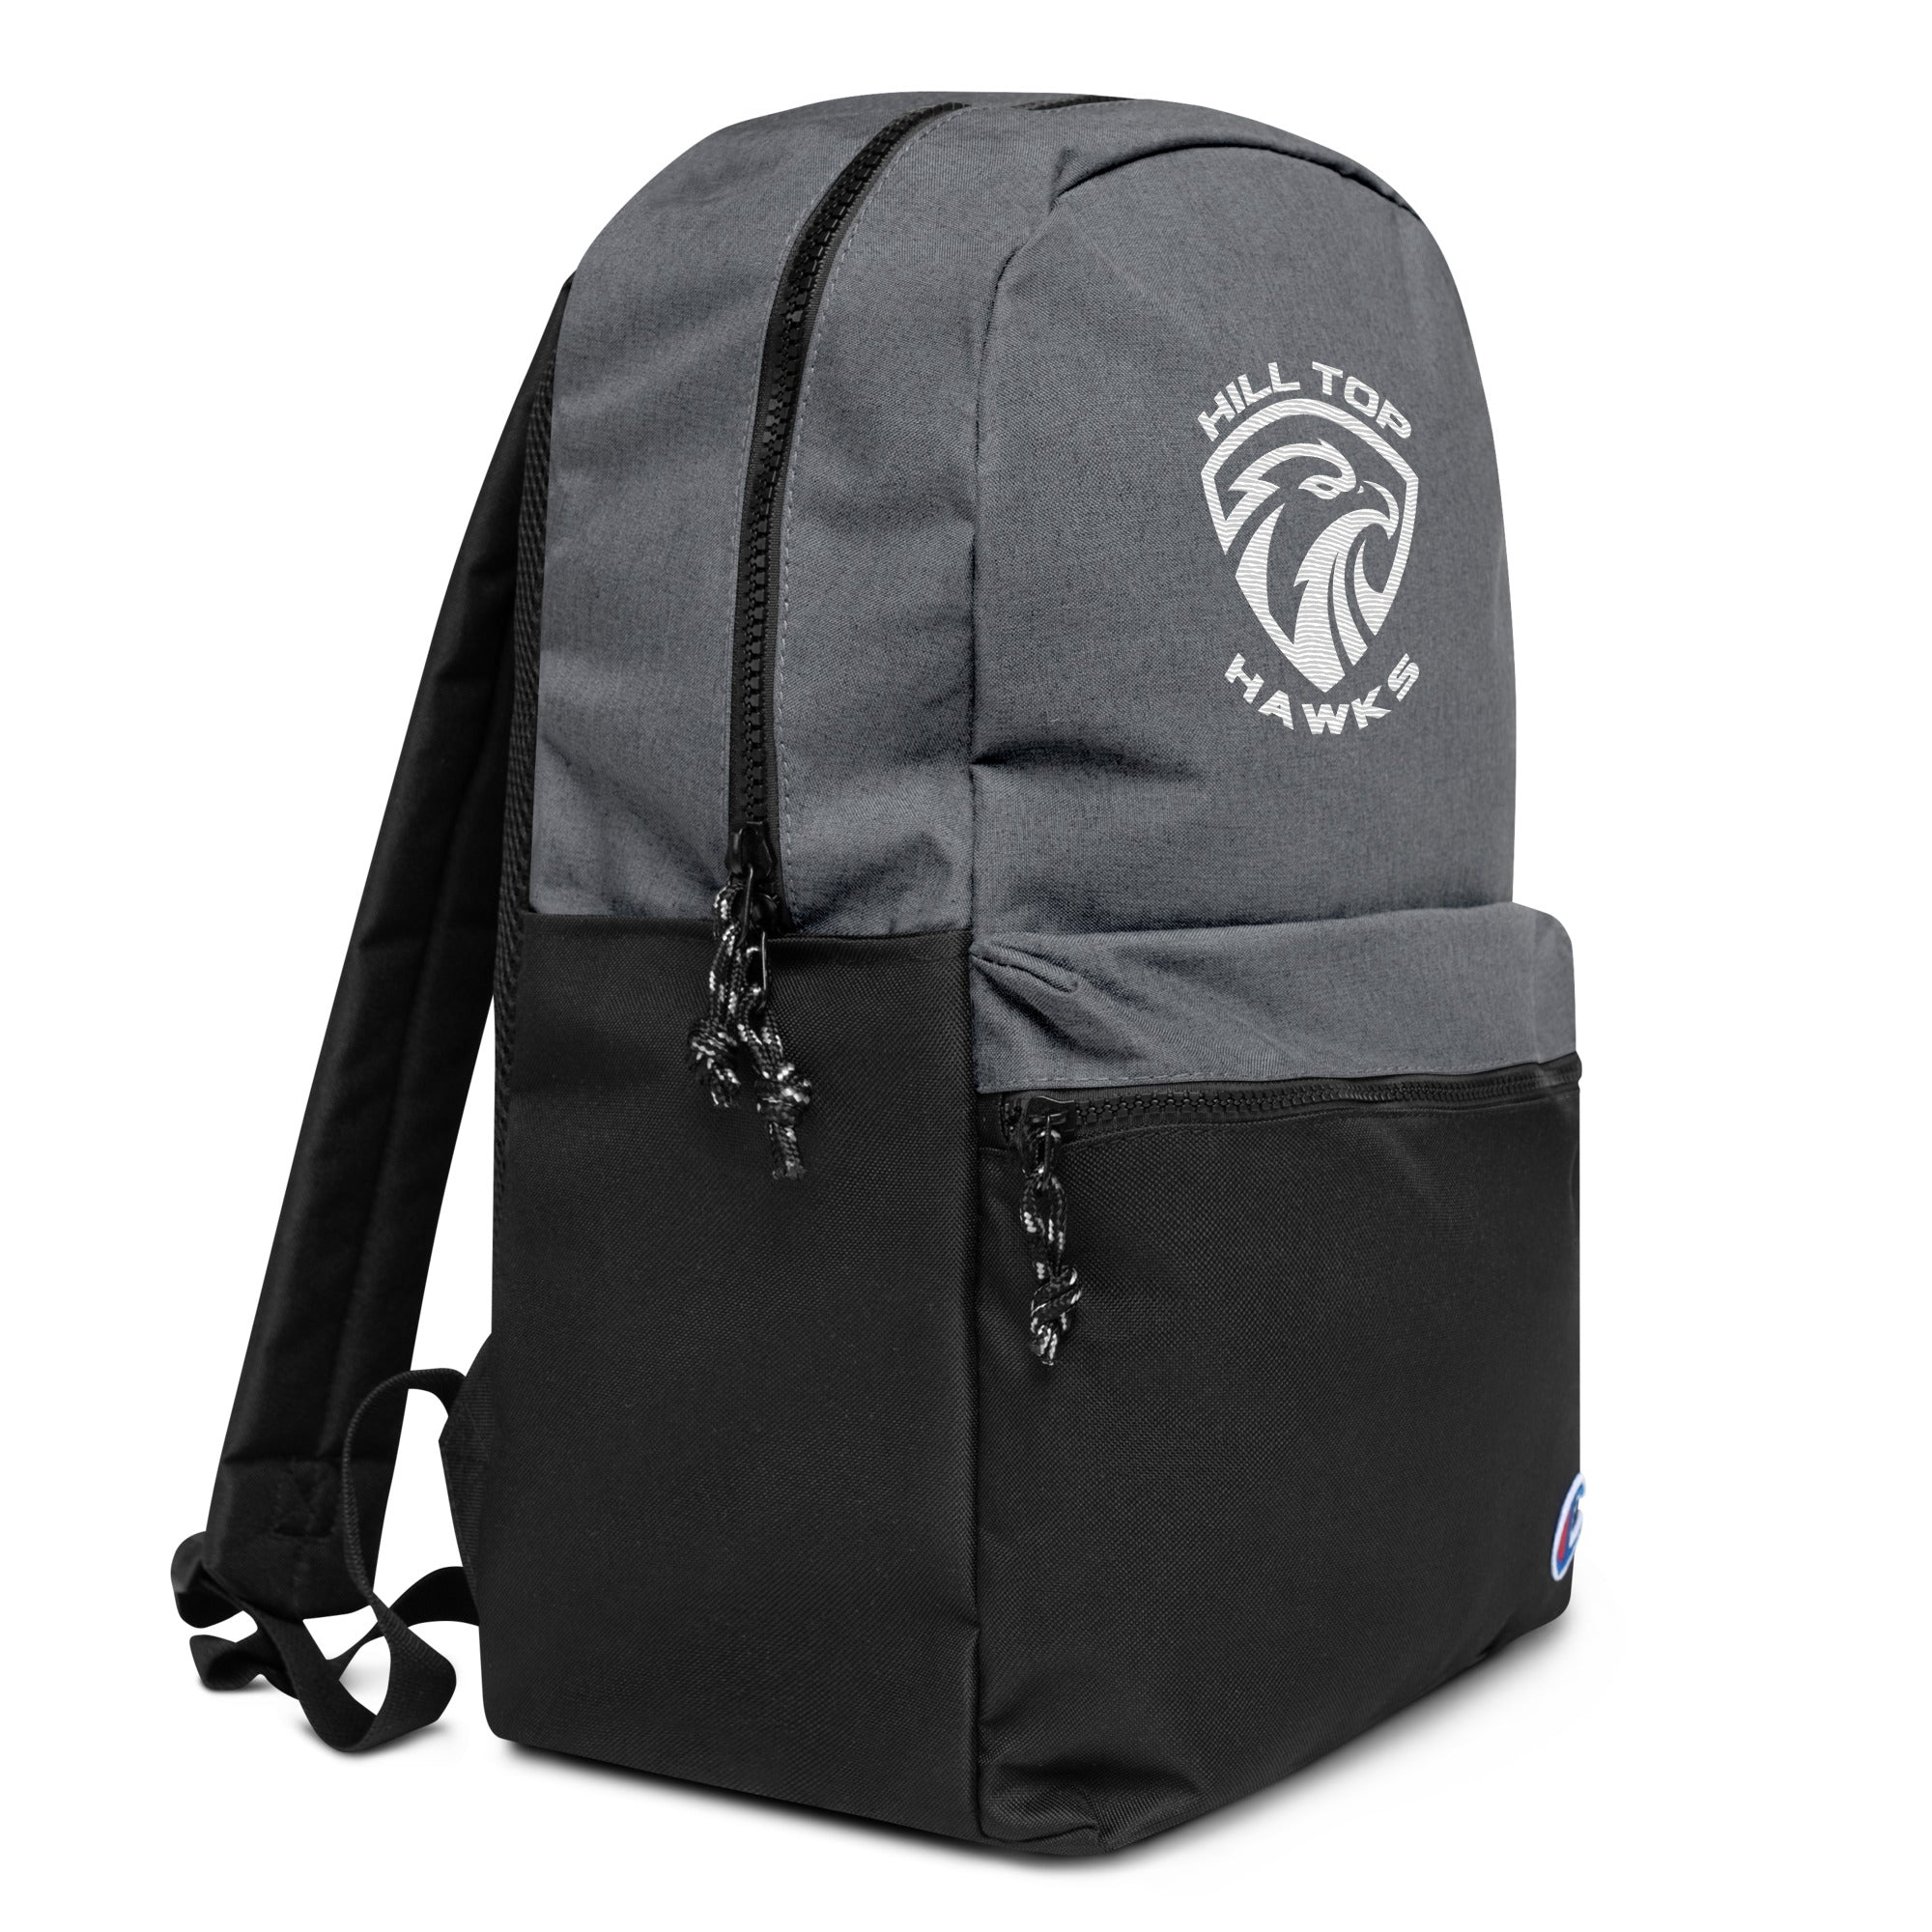 Hill Top Backpack